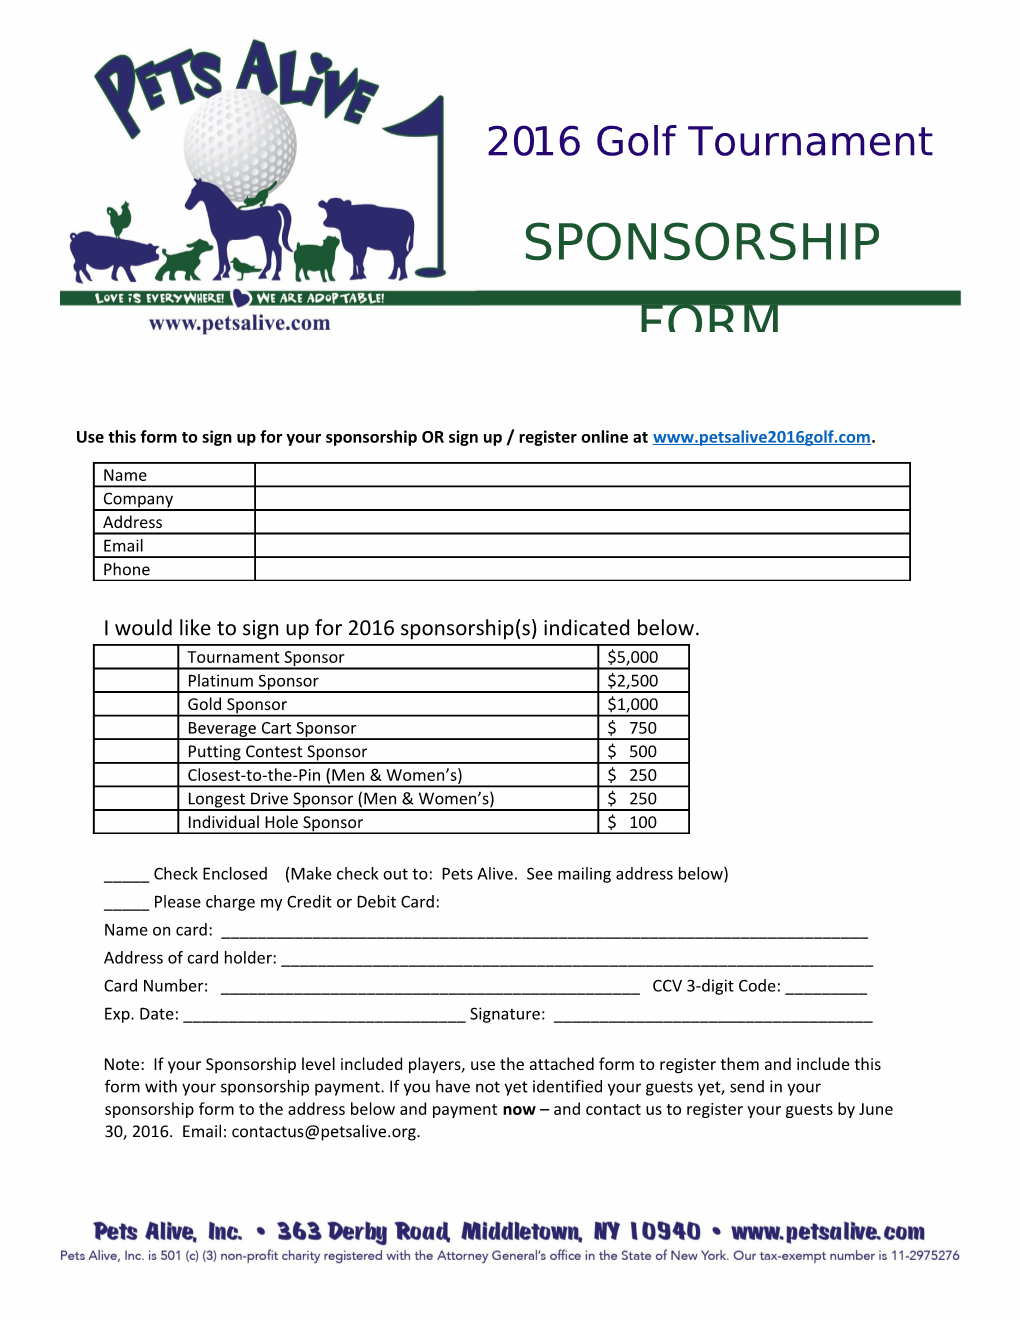 Use This Form to Sign up for Your Sponsorship OR Sign up / Register Online at